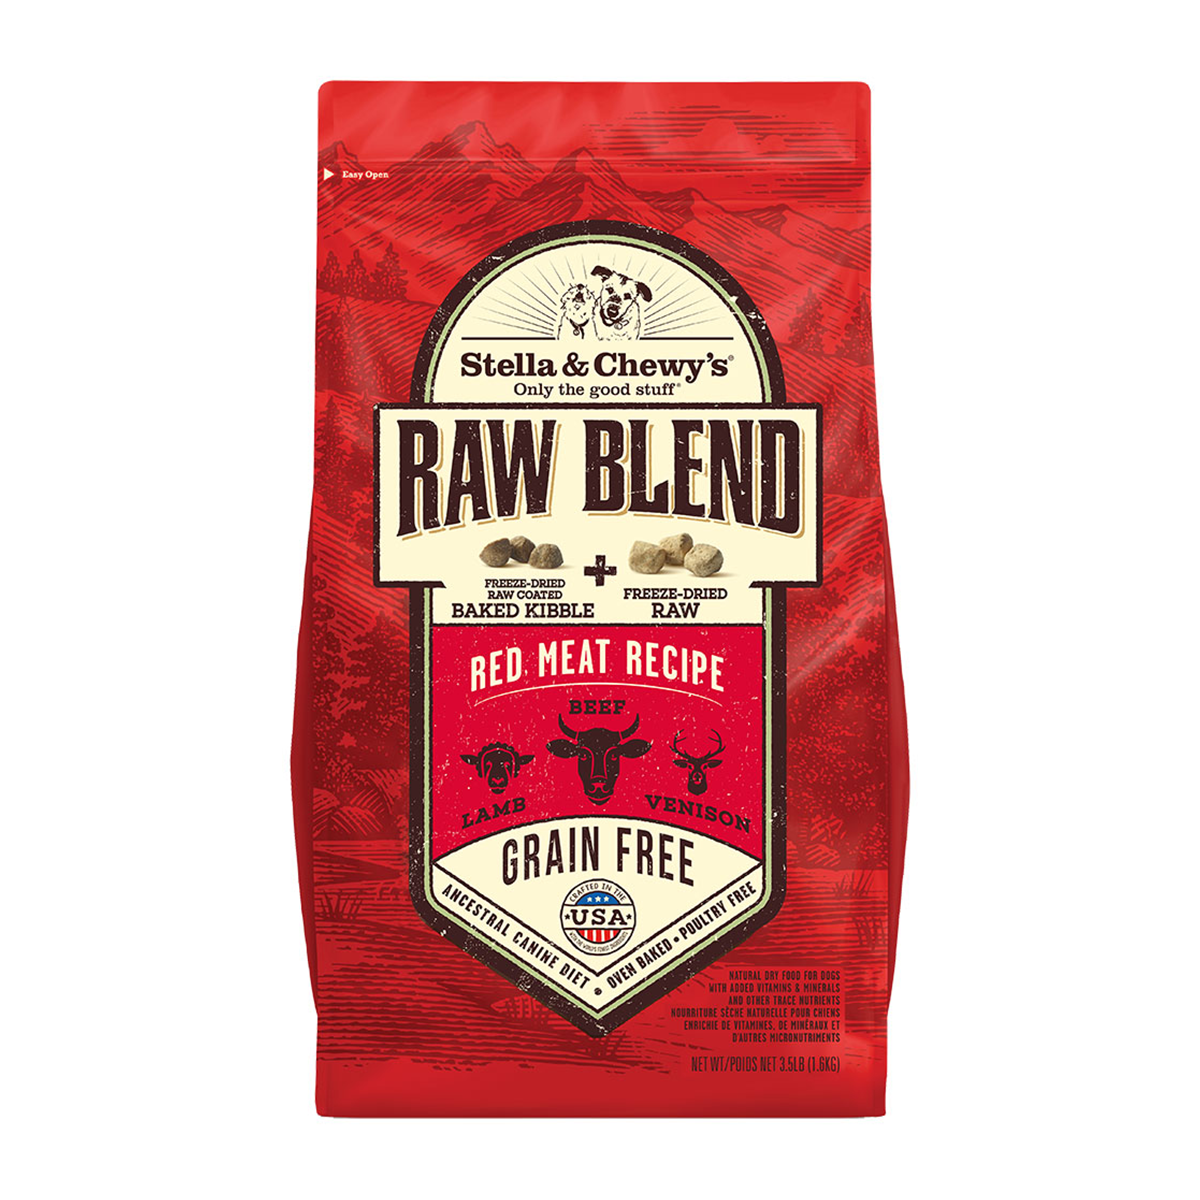 Stella & Chewy's Raw Blend Dog Food - Red Meat